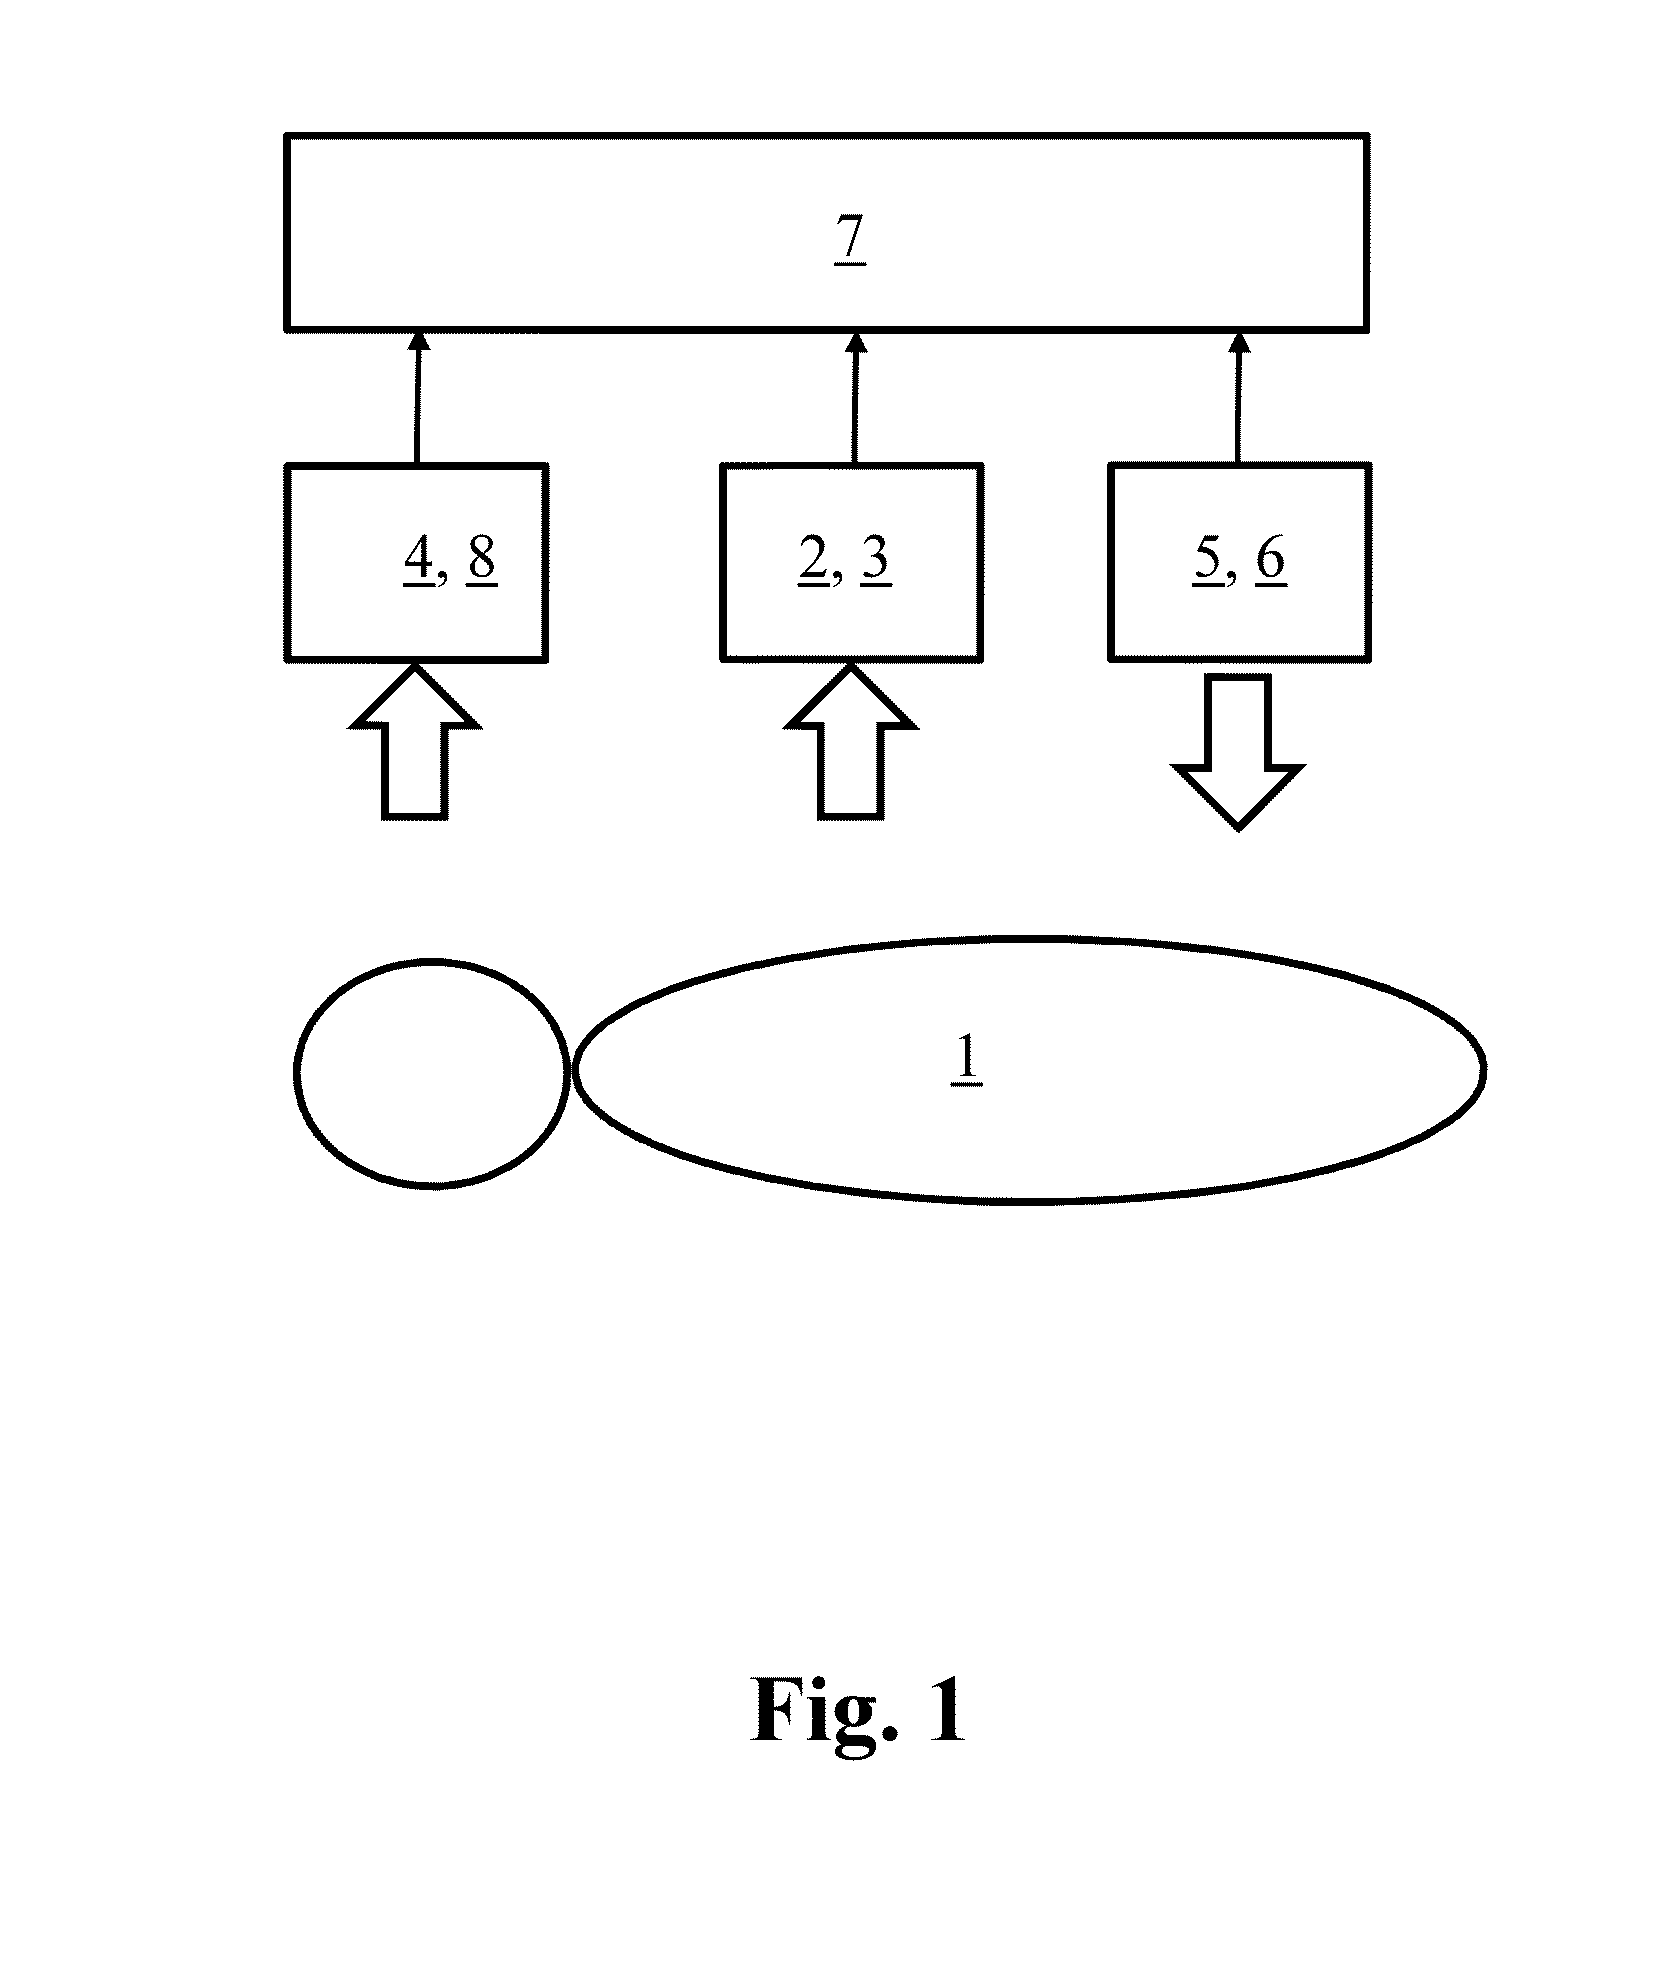 Appliance for performing anaesthesia or analgosedation, and method for operating an appliance for performing anaesthesia or analgosedation